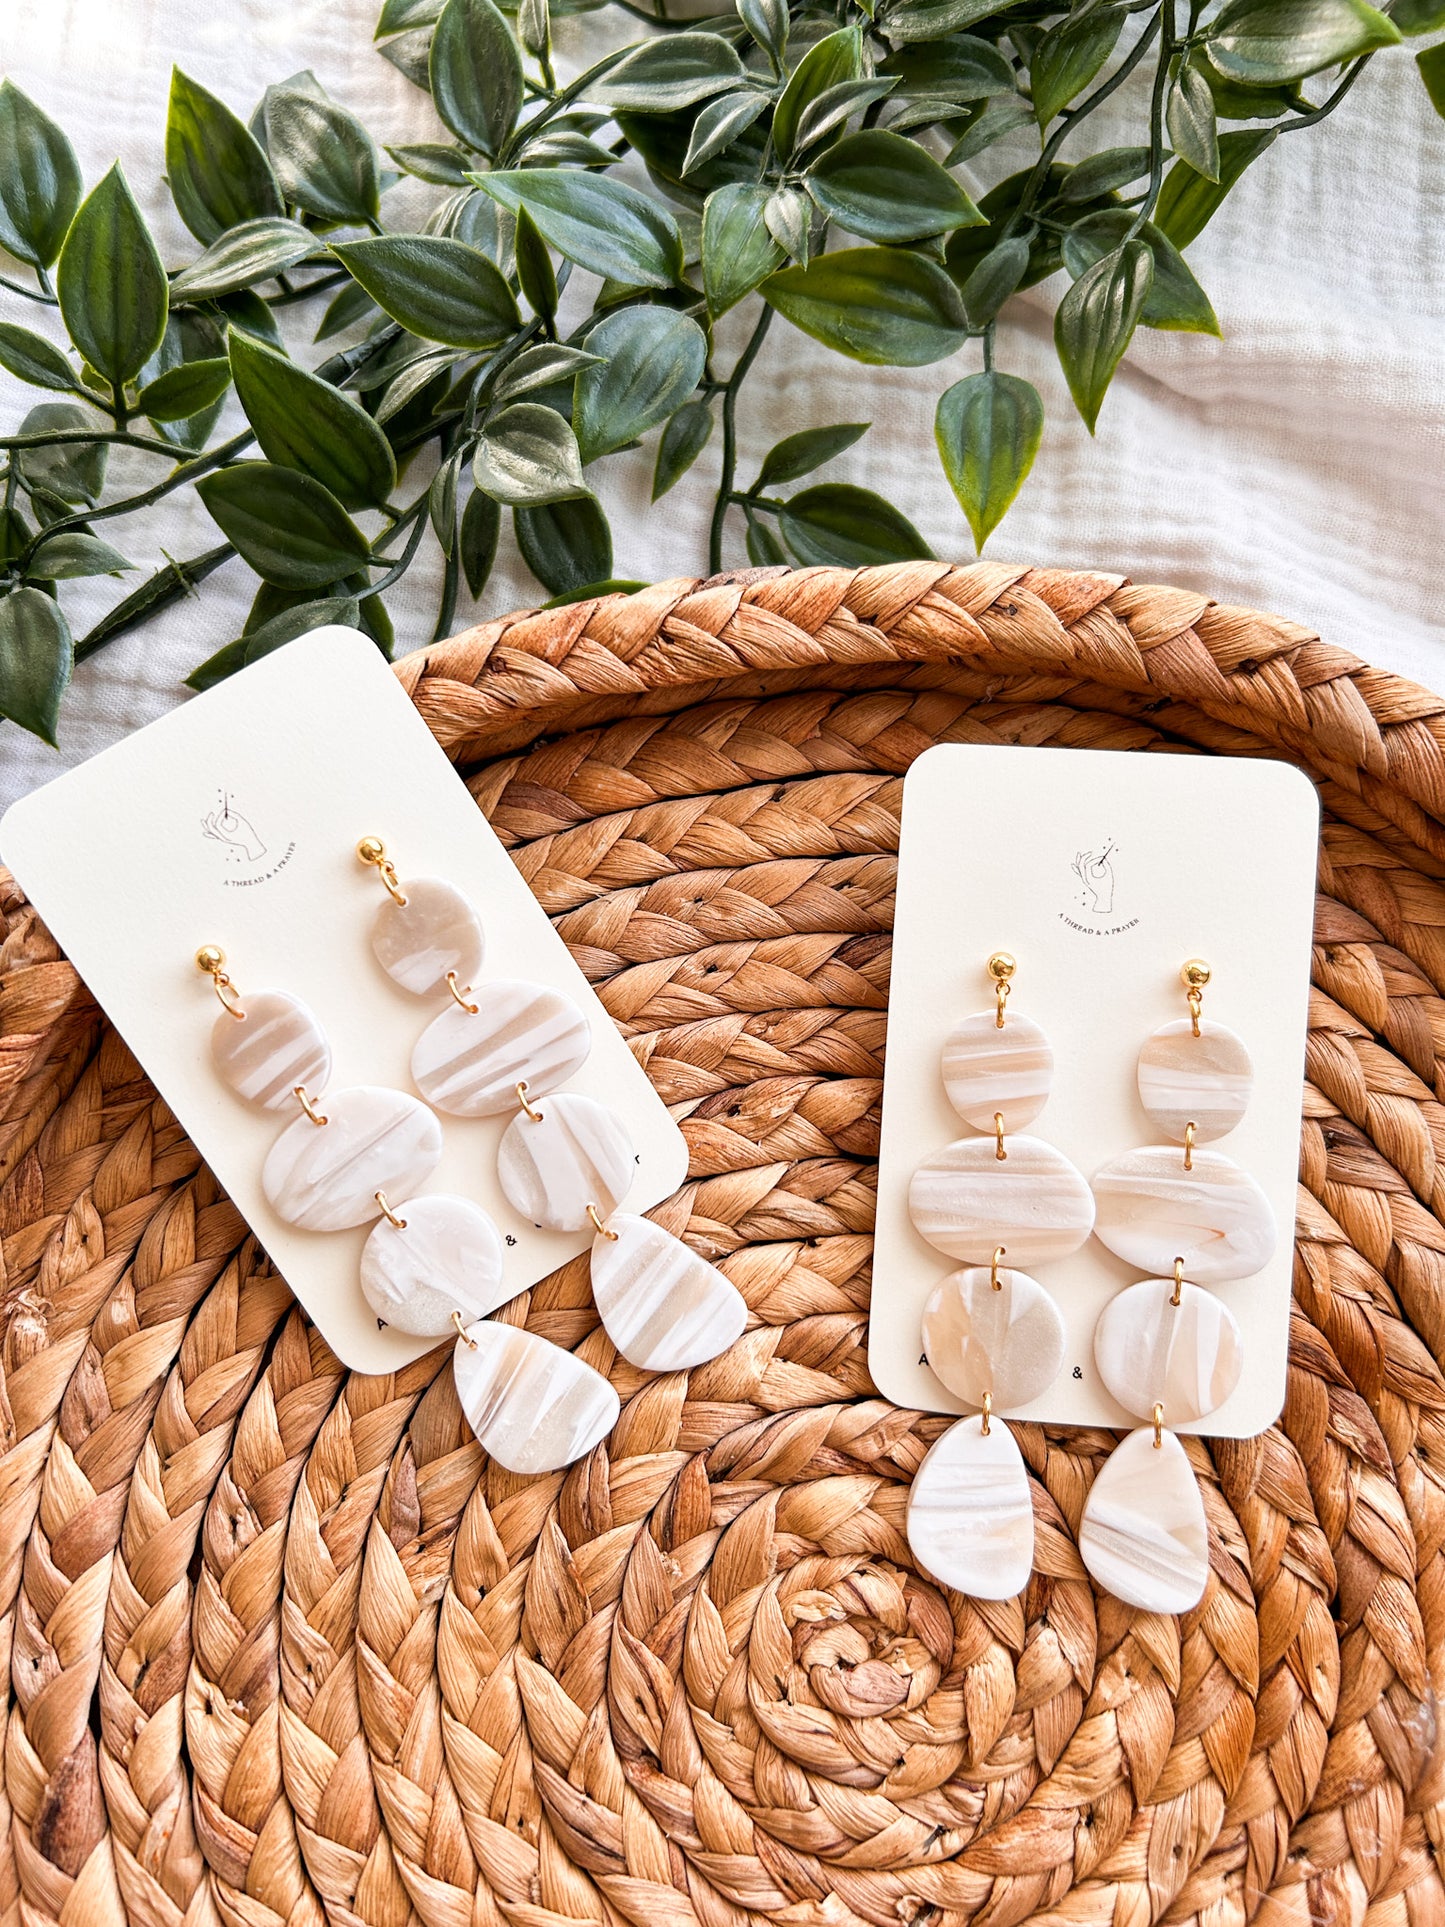 Mystic Vibes Winter Clay Earrings | Winter Fashion | Winter Color Earrings | Statement Earrings | Lightweight